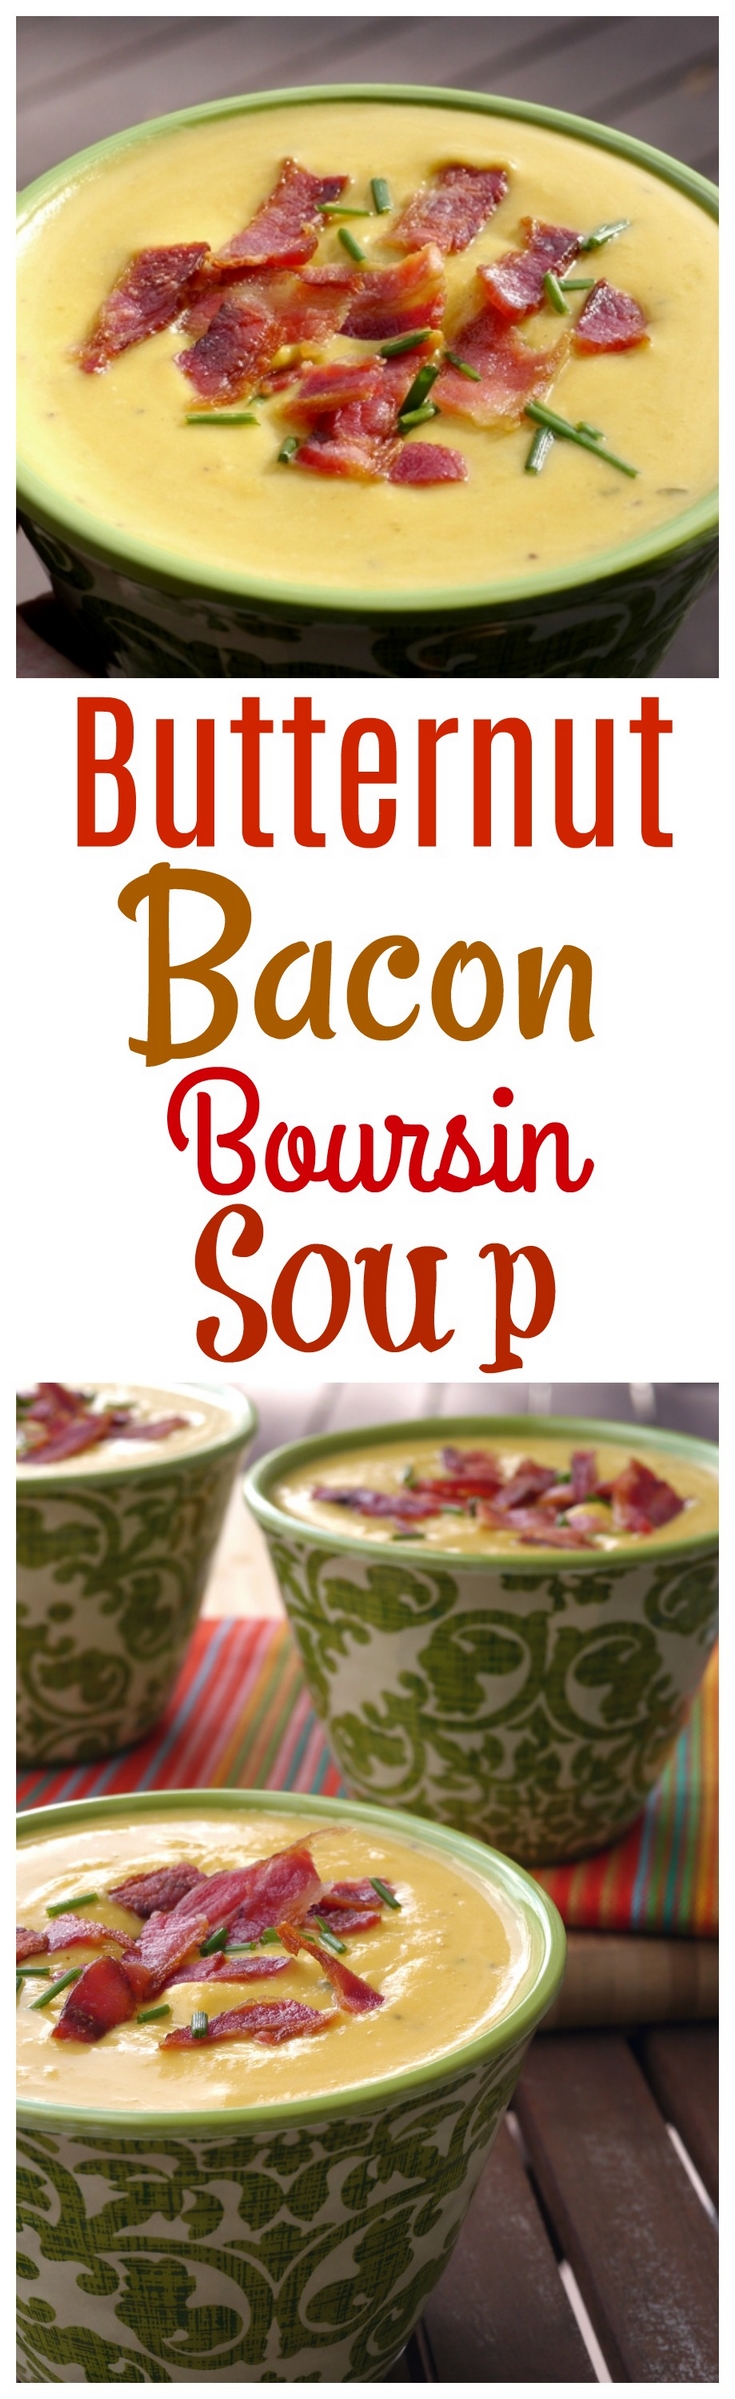 VIDEO + RECIPE: The already seasoned cheese in this absolutely creamy Butternut-Boursin-Bacon Soup puts the flavor over the top. Serve this soup as an appetizer or side dish when you are looking to impress from NoblePig.com. via @cmpollak1